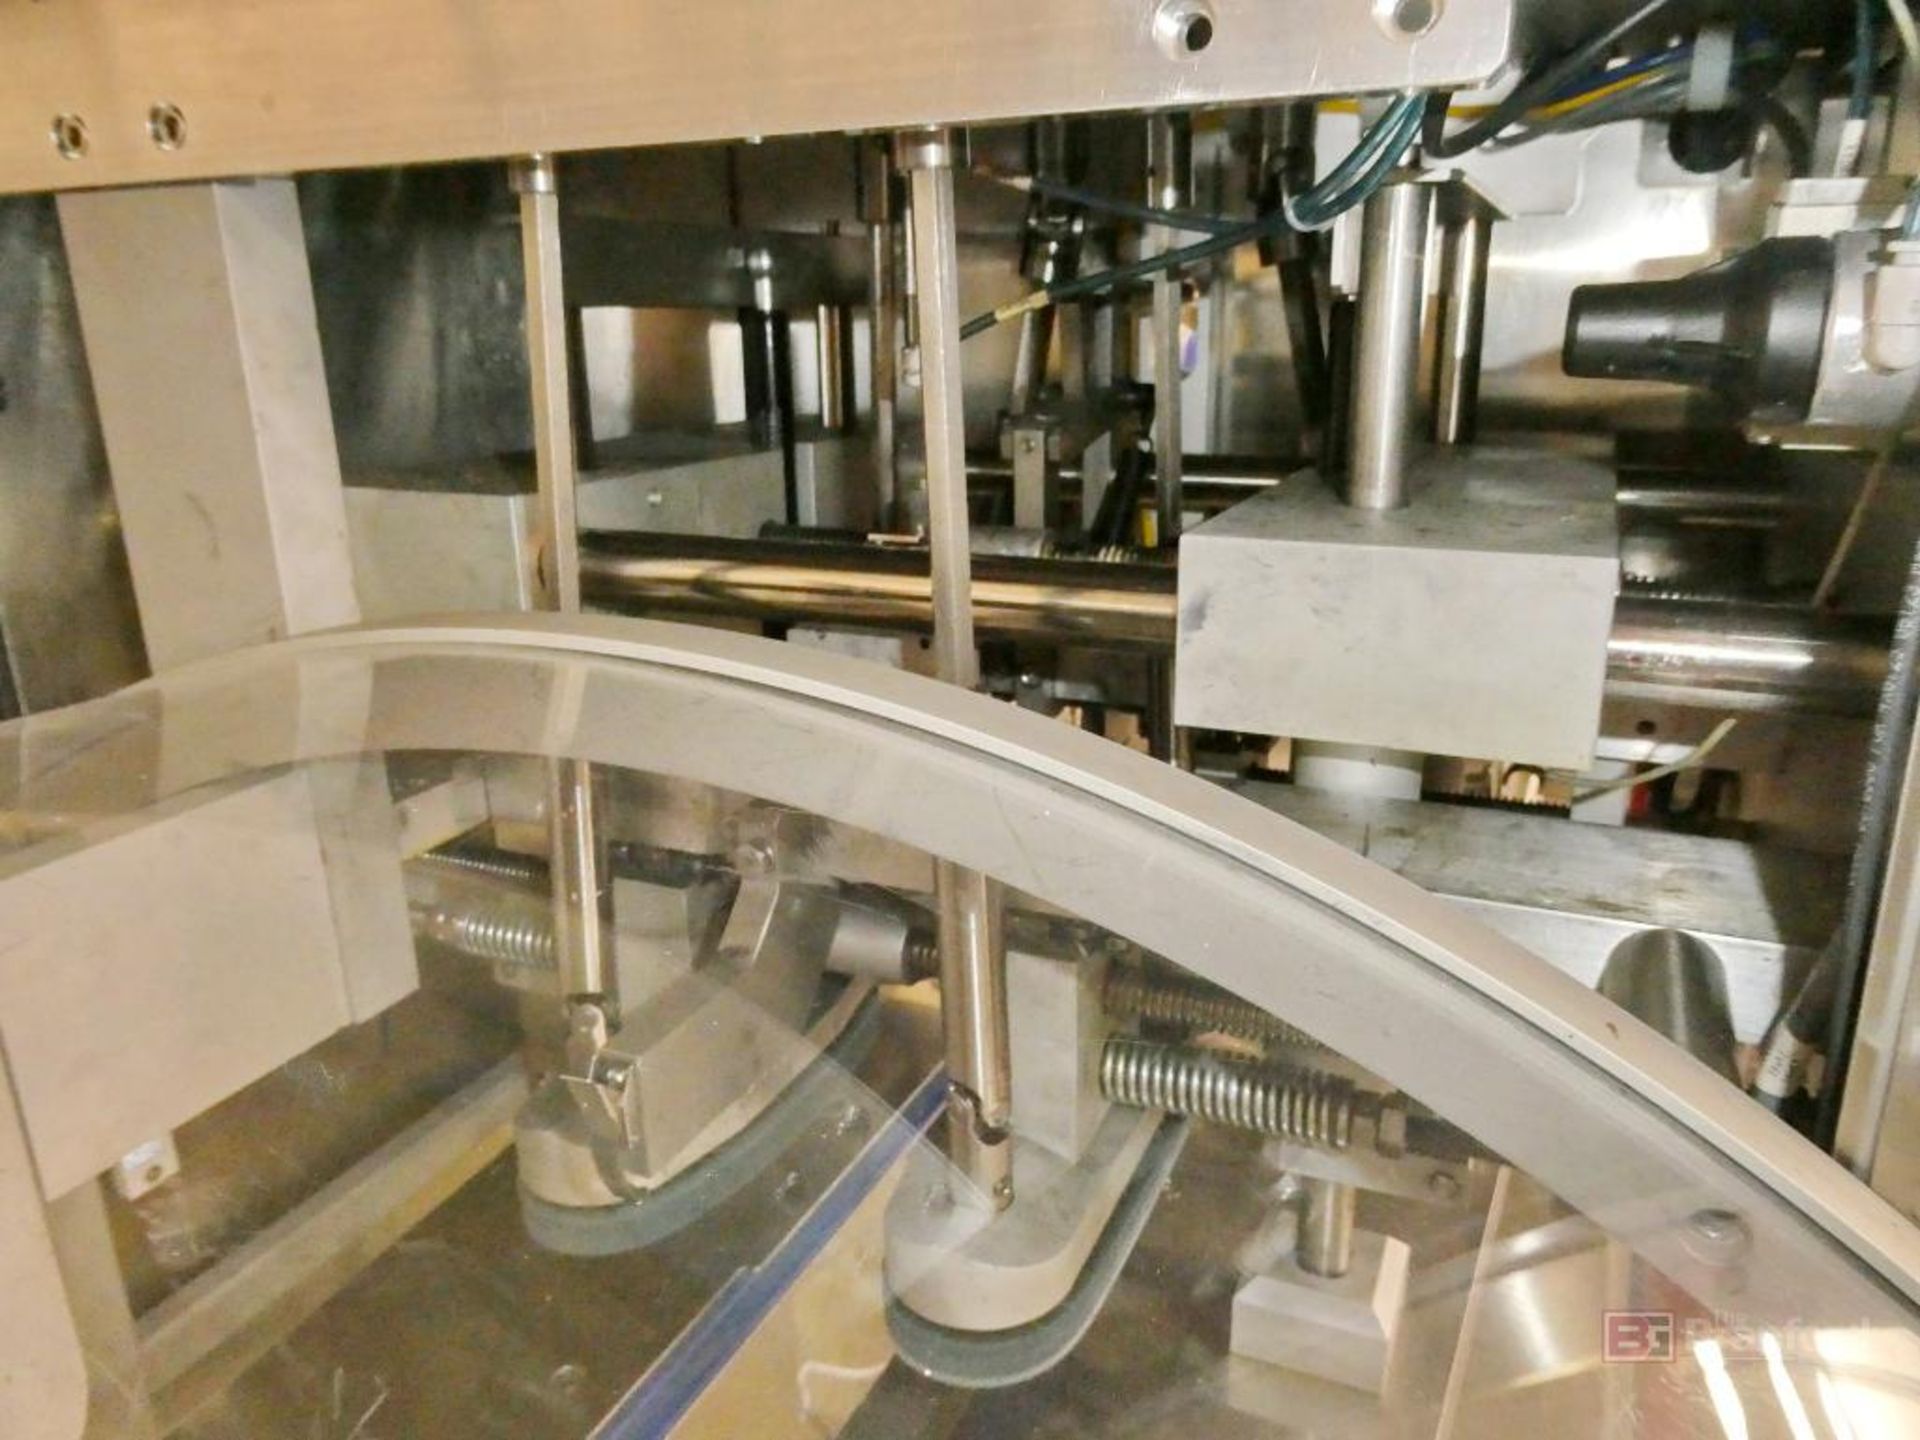 2020 NJM Packaging Model Beltorque BTIC, Stainless Steel Inline Capping Machine - Image 3 of 7